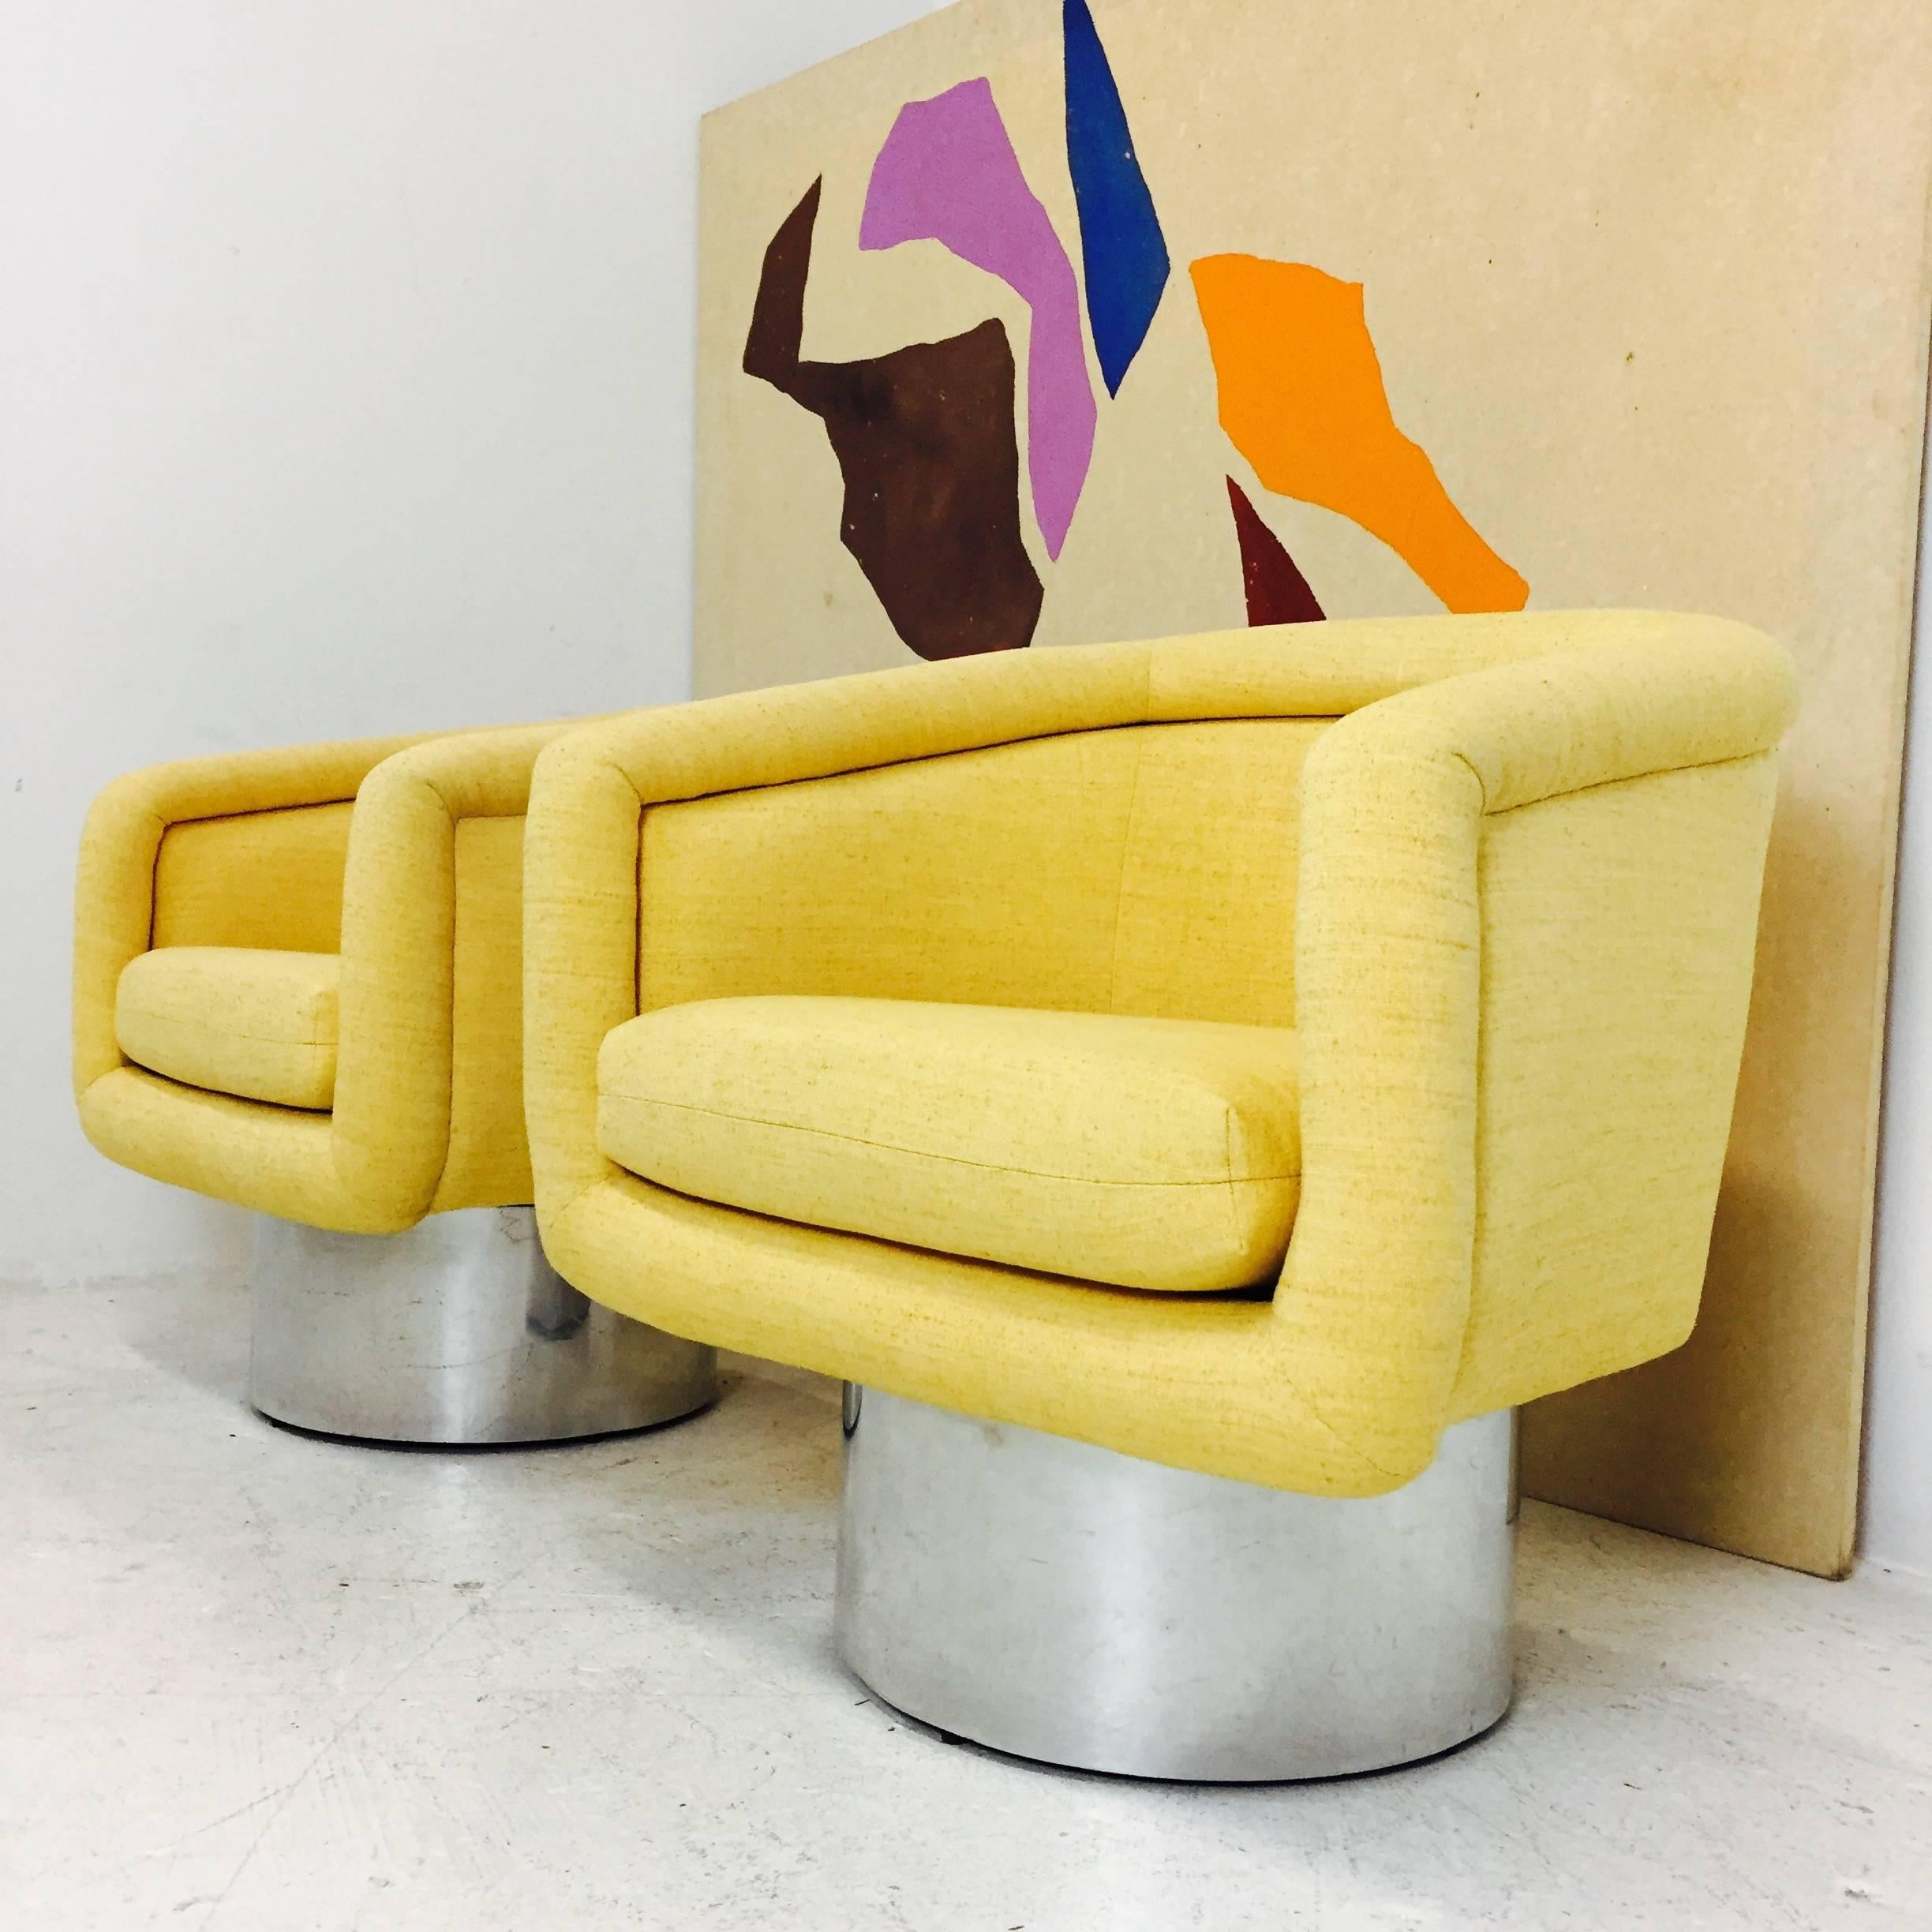 Cheerful and elegant upholstered swivel chairs with plinth base designed by Leon Rosen for Pace collection. Upholstery is in good condition with minimal soiling, circa 1970s
contact for more information on condition.

Dimensions: 29" W x